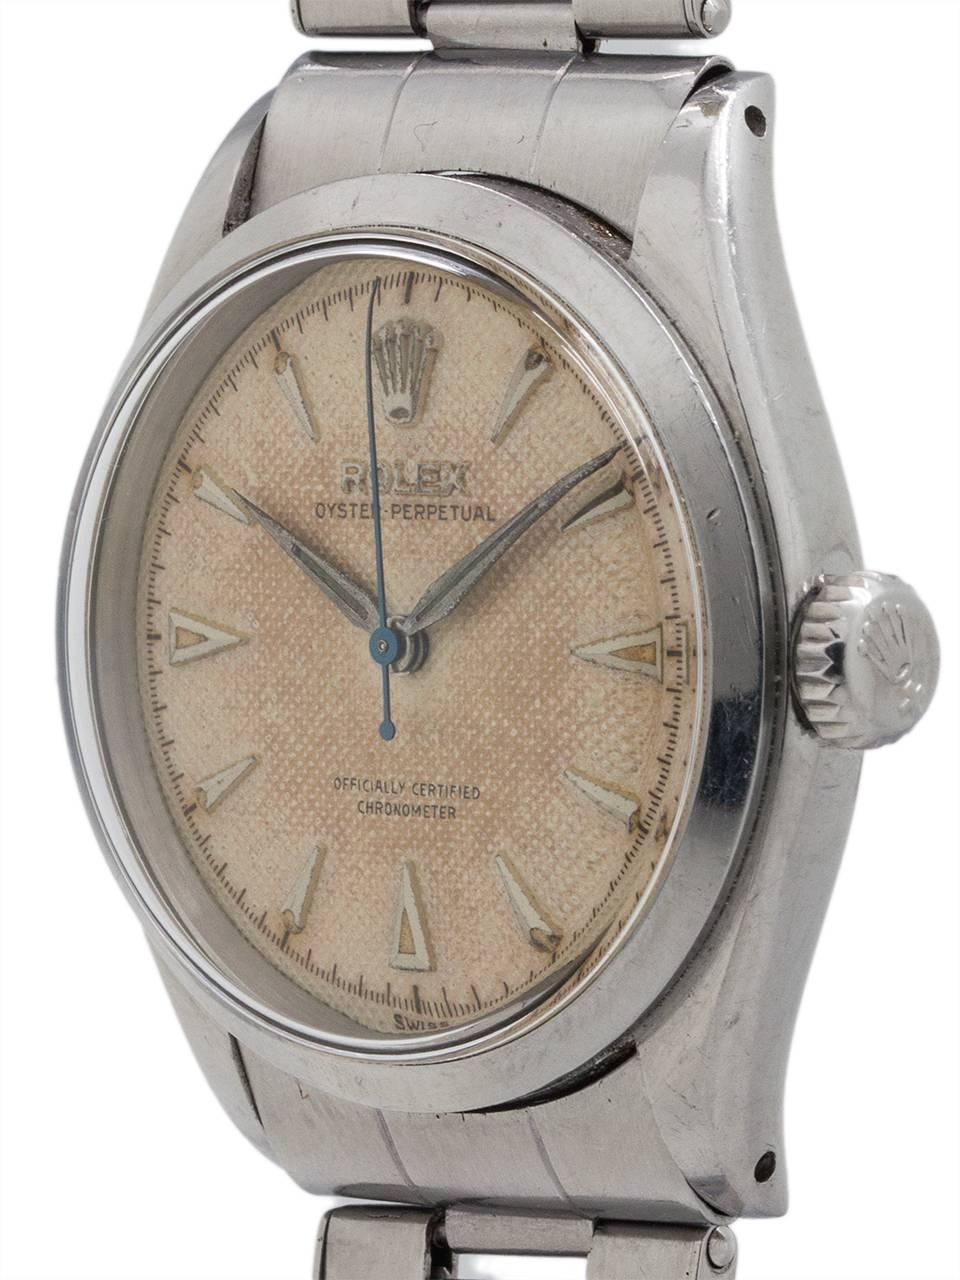 Vintage man’s Rolex Oyster Perpetual ref #6284 in stainless steel circa 1950’s. Featuring a 34mm diameter Oyster case in wonderful condition, with smooth dome bezel, acrylic crystal, and very pleasing original patina’d cream dial with raised  silver